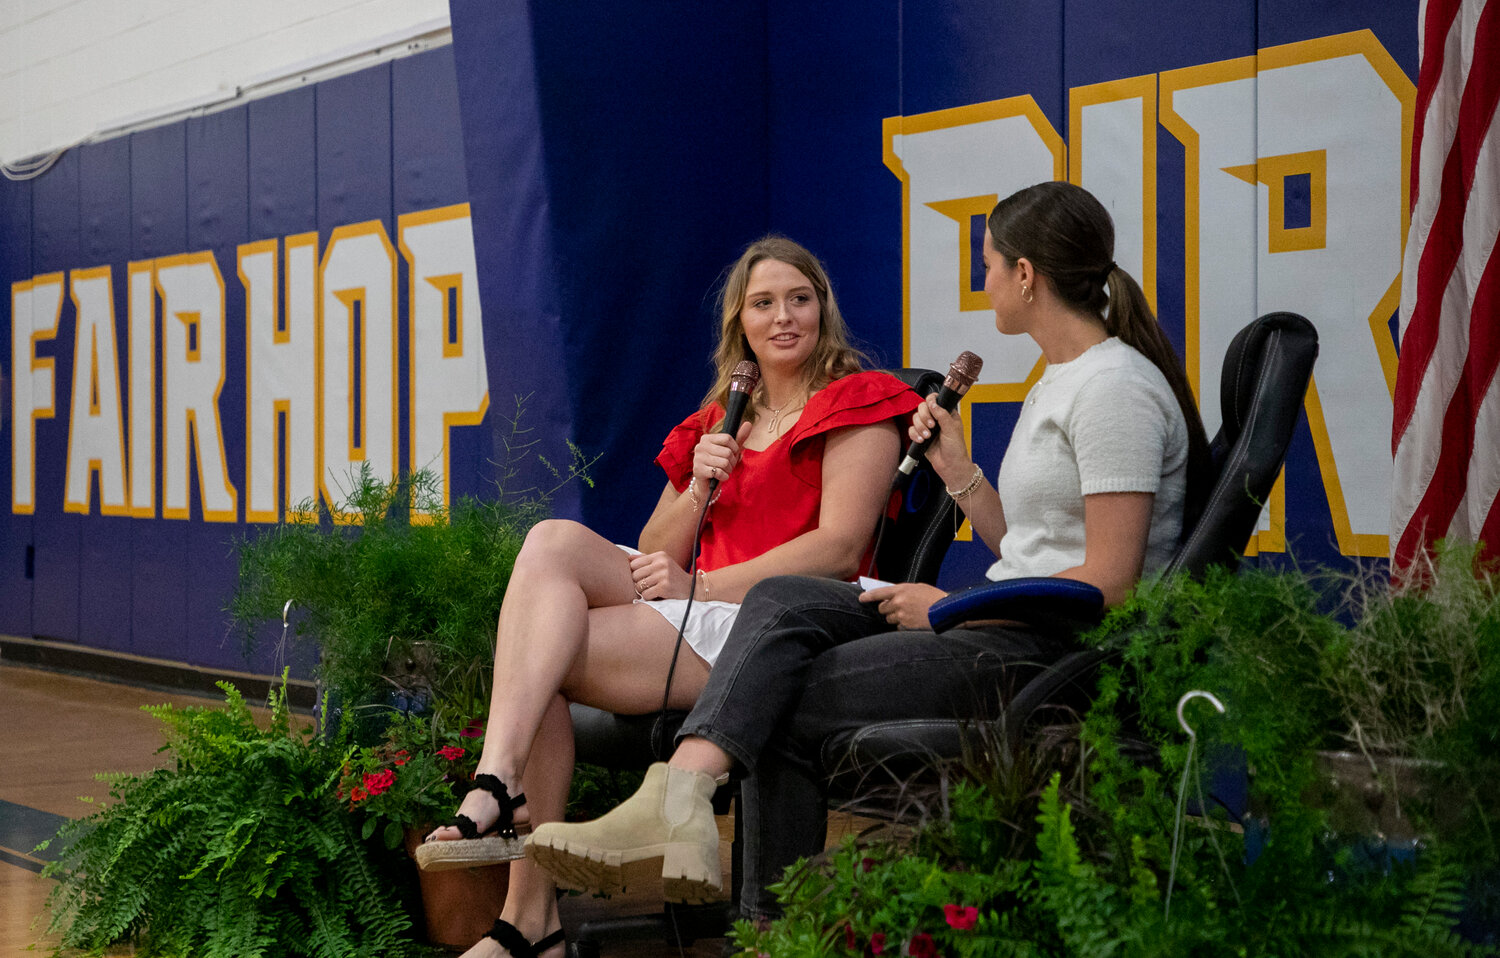 Fairhope senior Ryley Harrison is interviewed by Pirate junior Murphy Creel after April 17’s signing ceremony in the gymnasium. Harrison signed with the South Alabama softball squad as one of 17 student-athletes who penned college commitments.